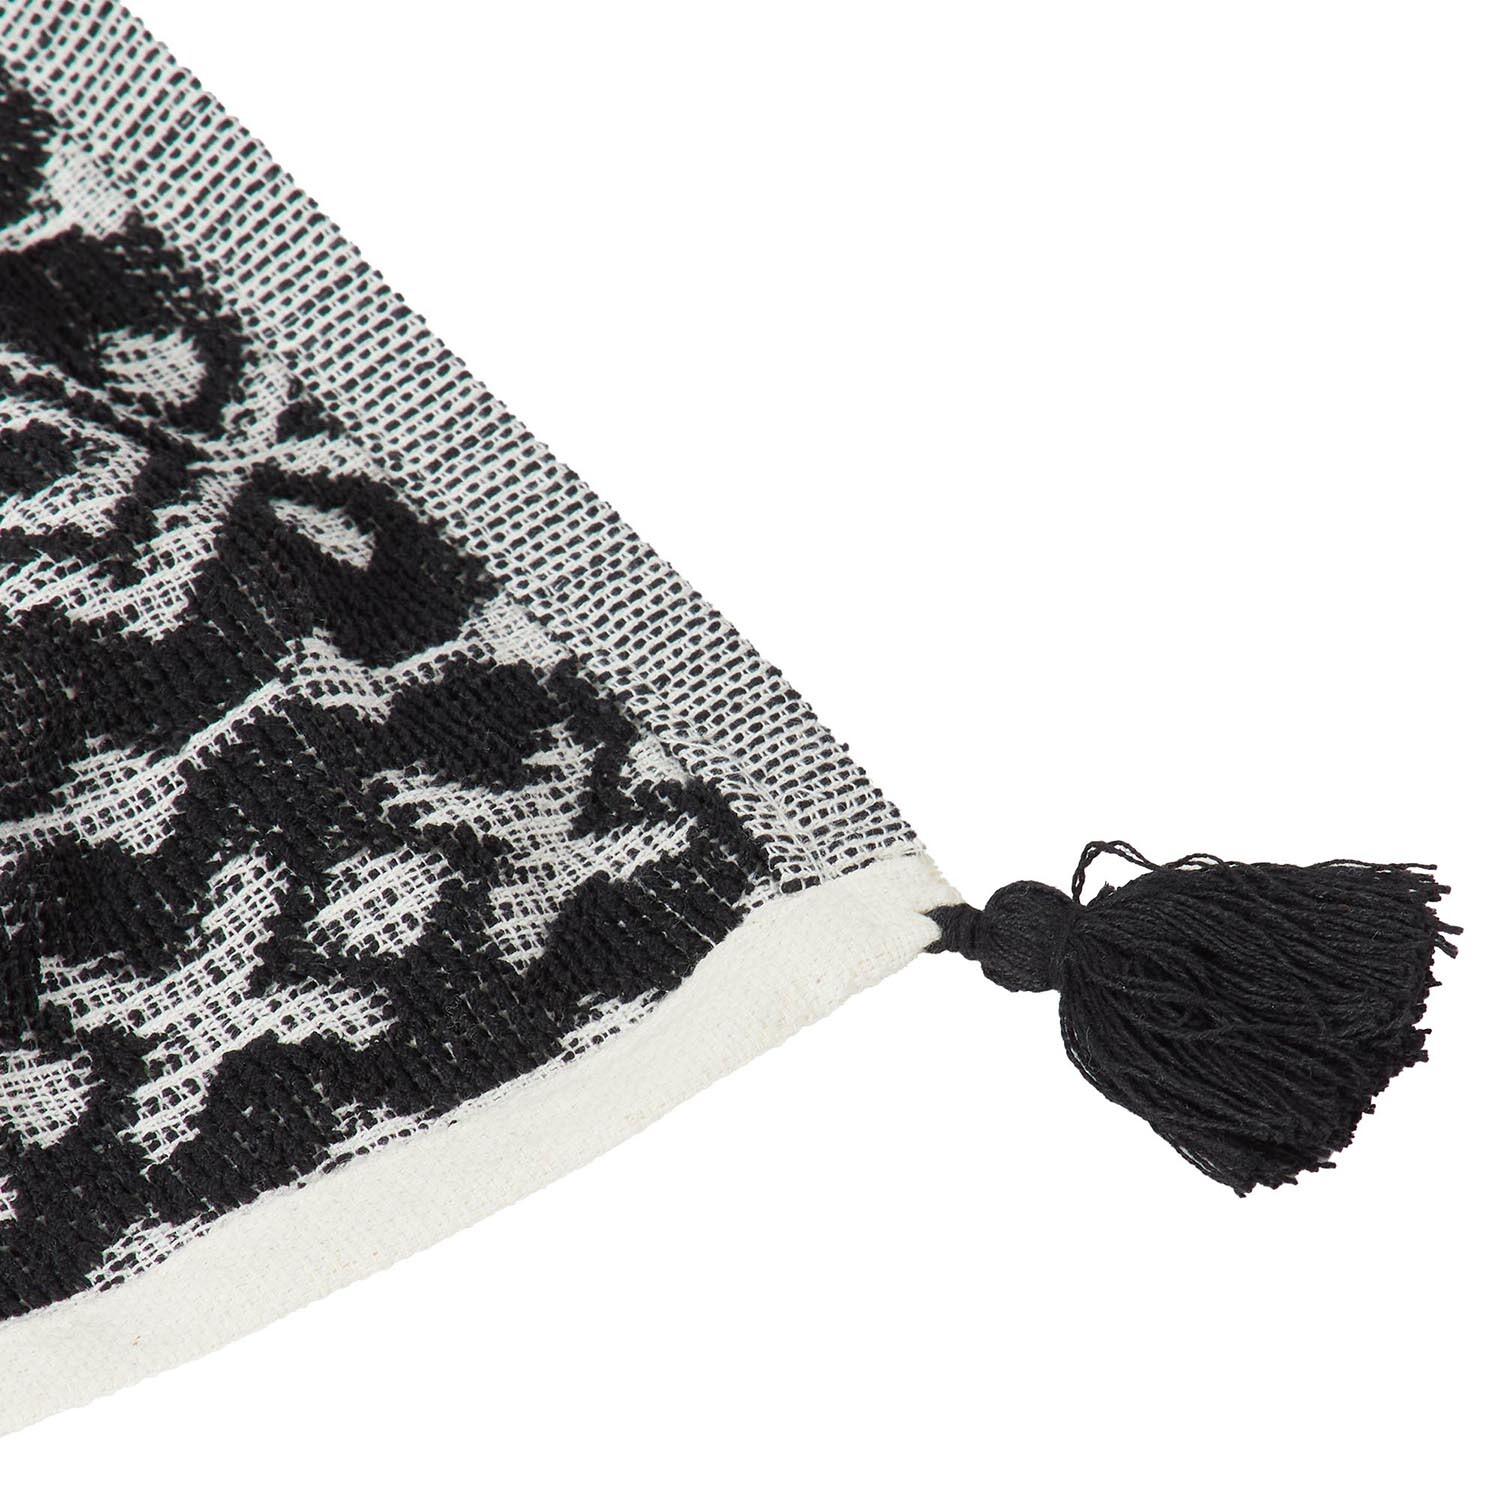 Pack of 2 Jacquard Terry Kitchen Towels with Tassels - Black Image 5